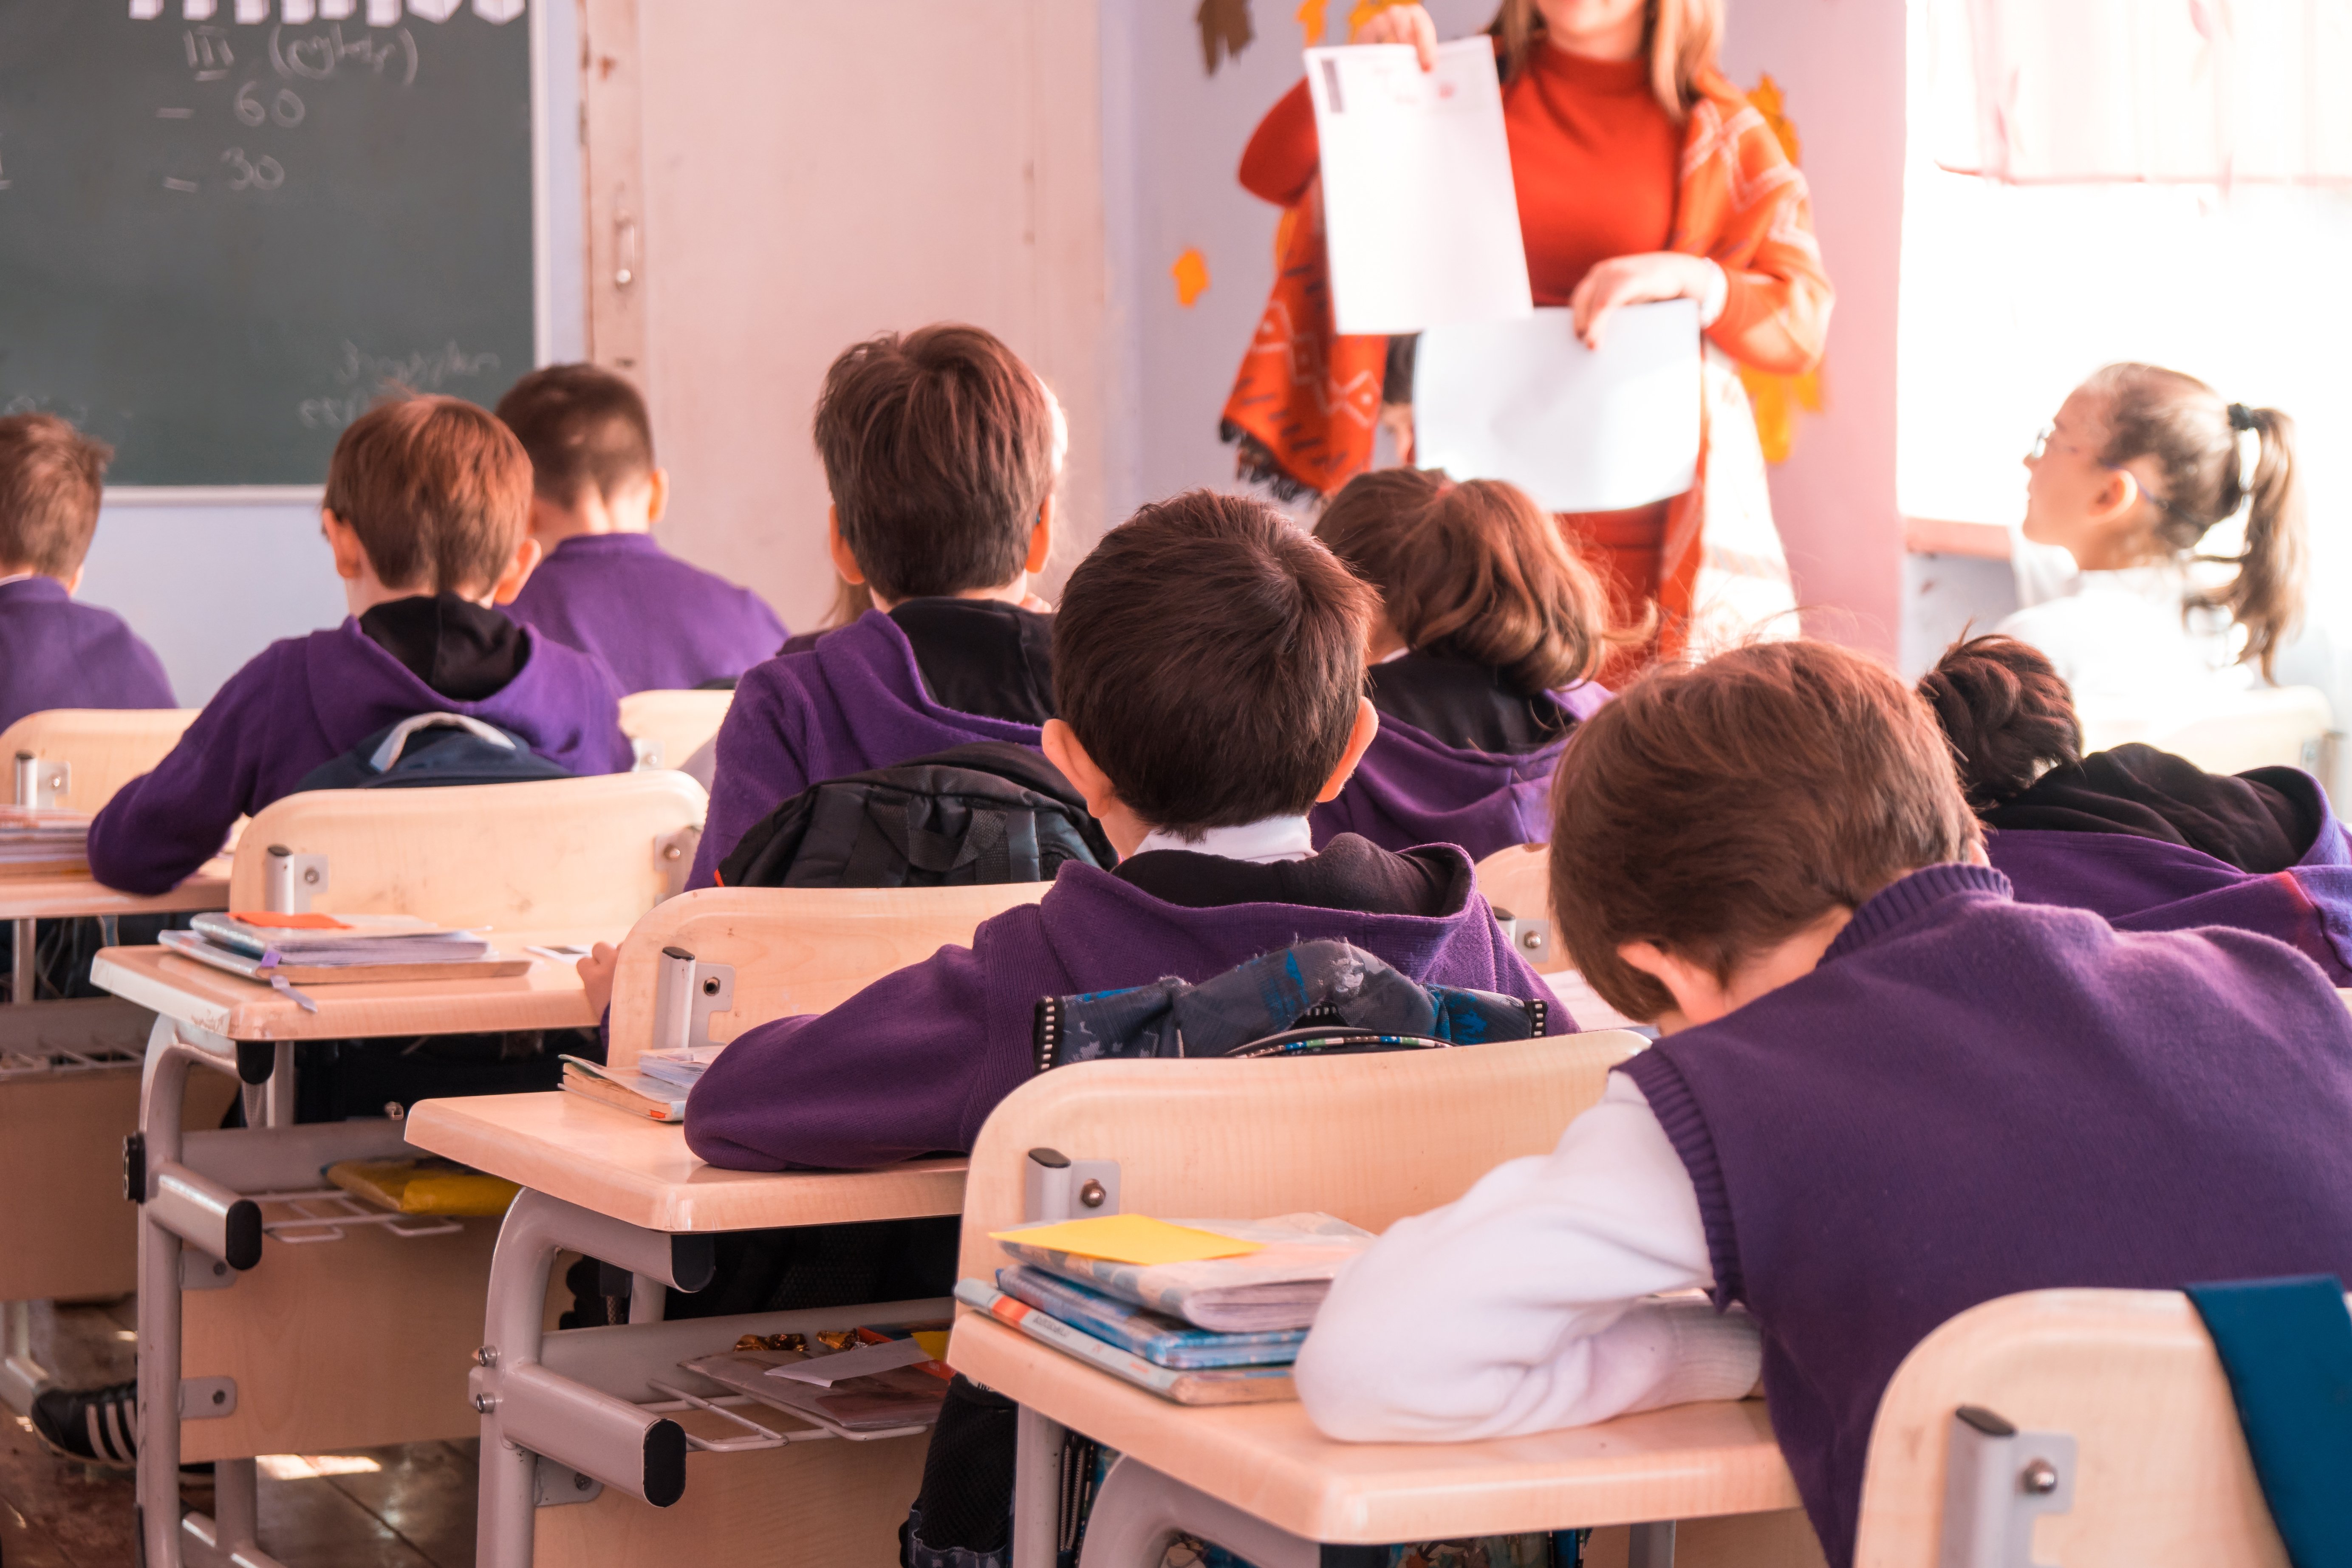 School children are participating actively in class | Photo: Shutterstock.com